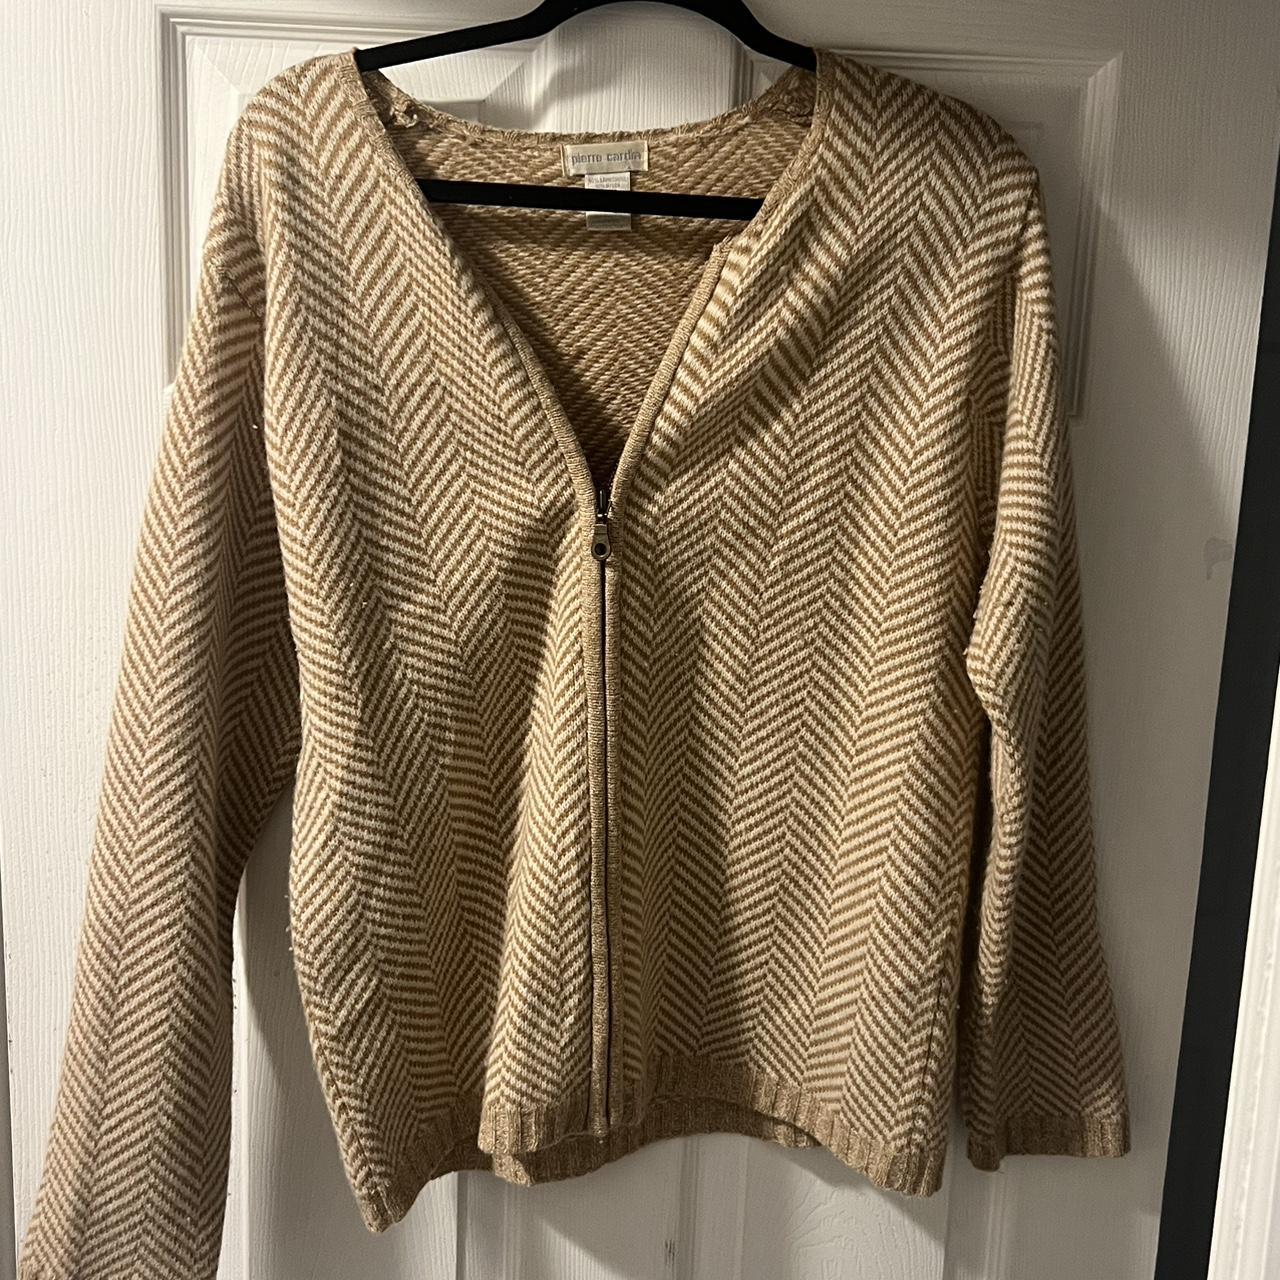 item listed by nostawcloset